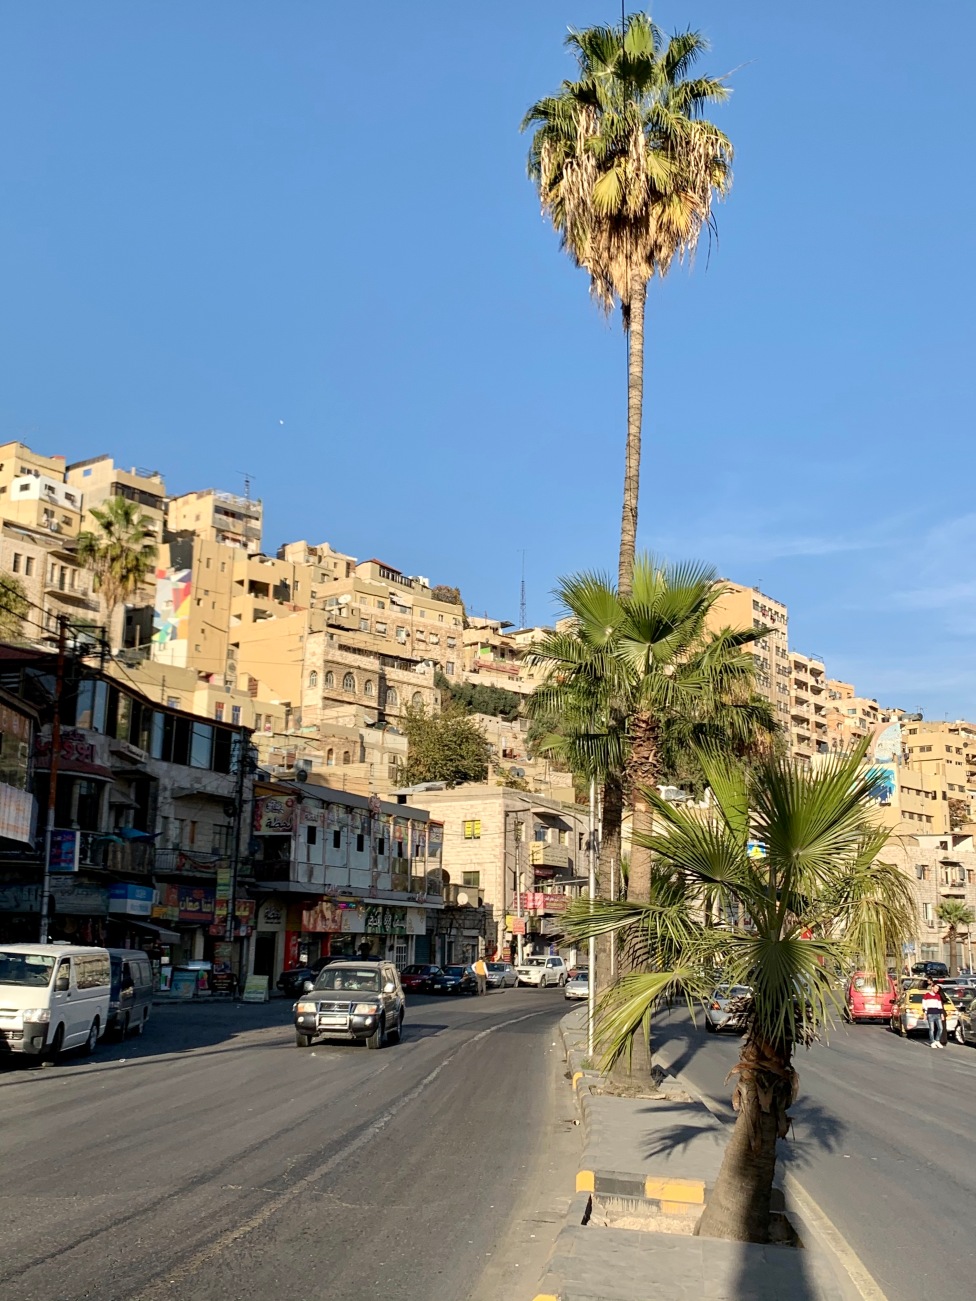 Streets of Amman in the main city center